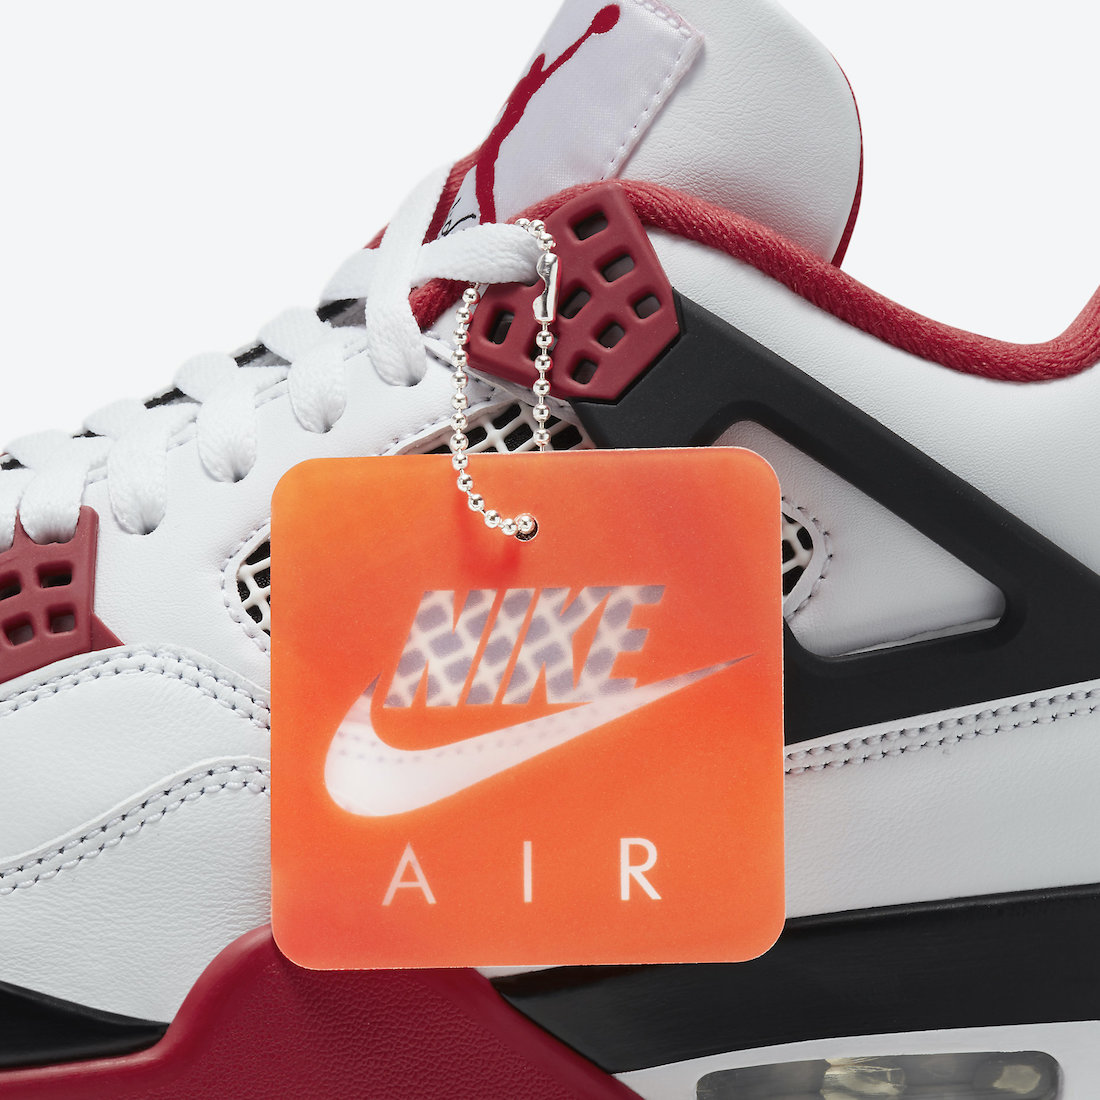 Official Look At The Air Jordan 4 Retro “Fire Red”